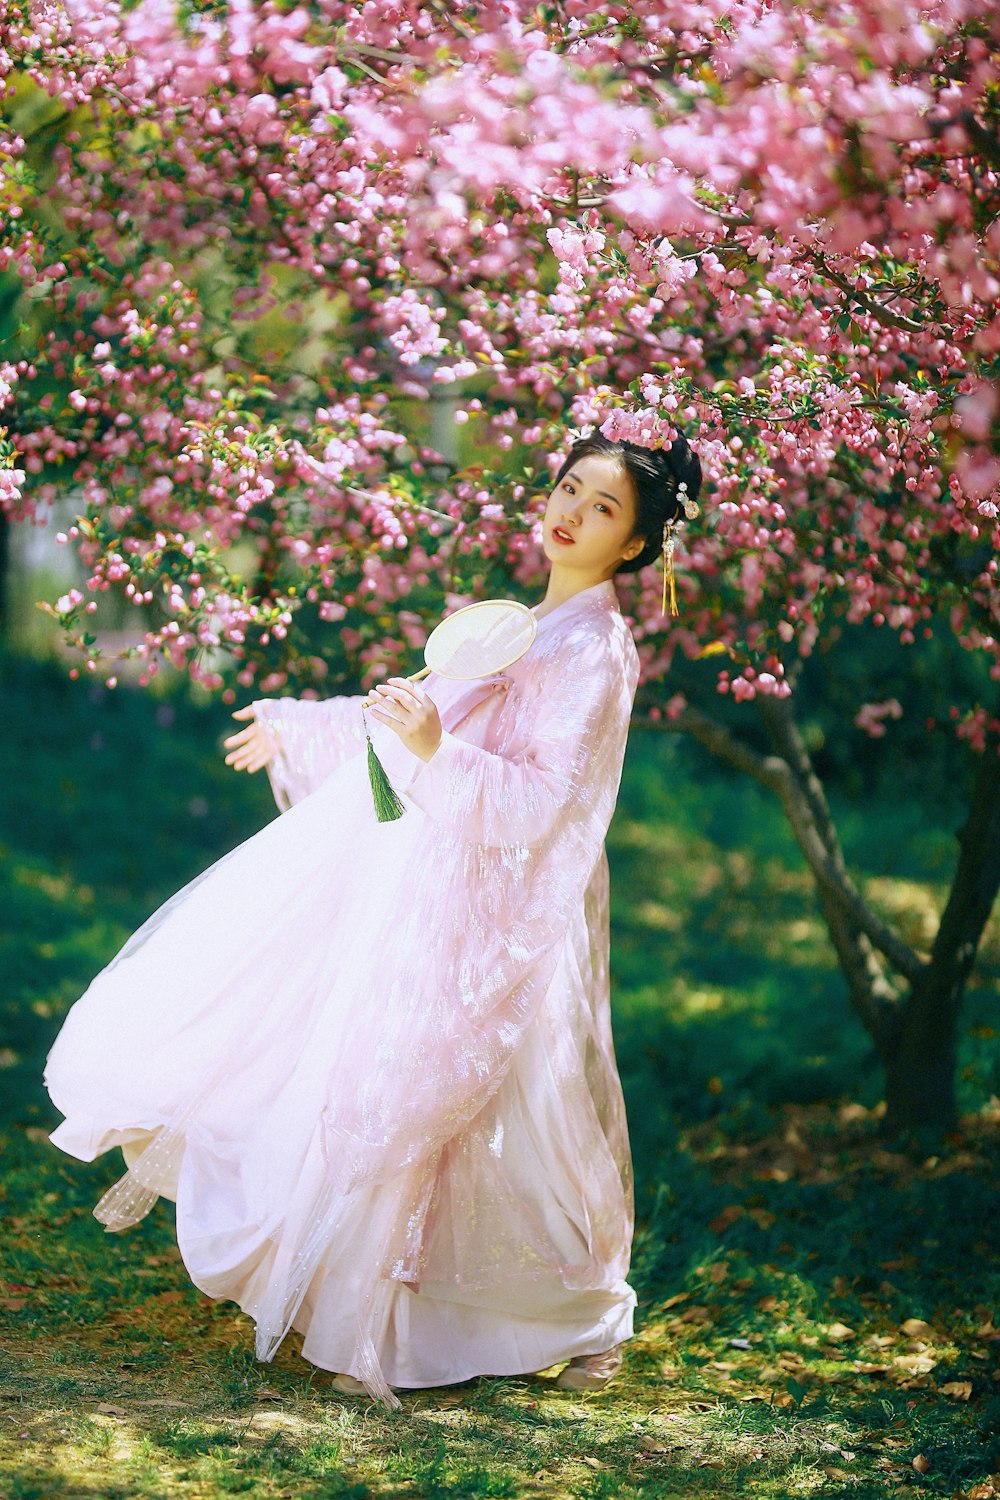 woman in white dress standing near pink flowers